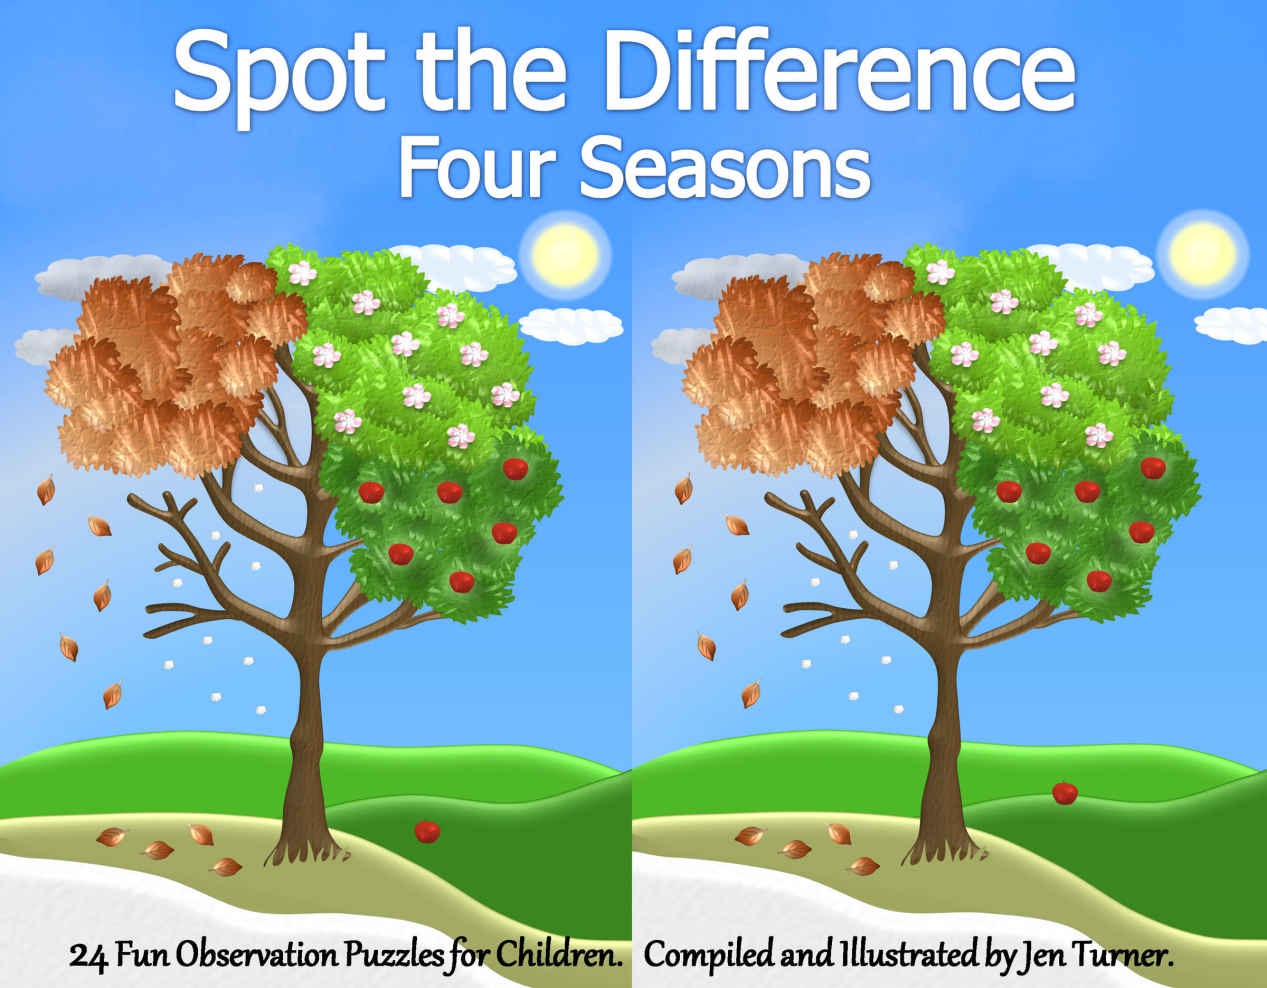 Spot the difference Four Seasons - Epub + Converted PDF